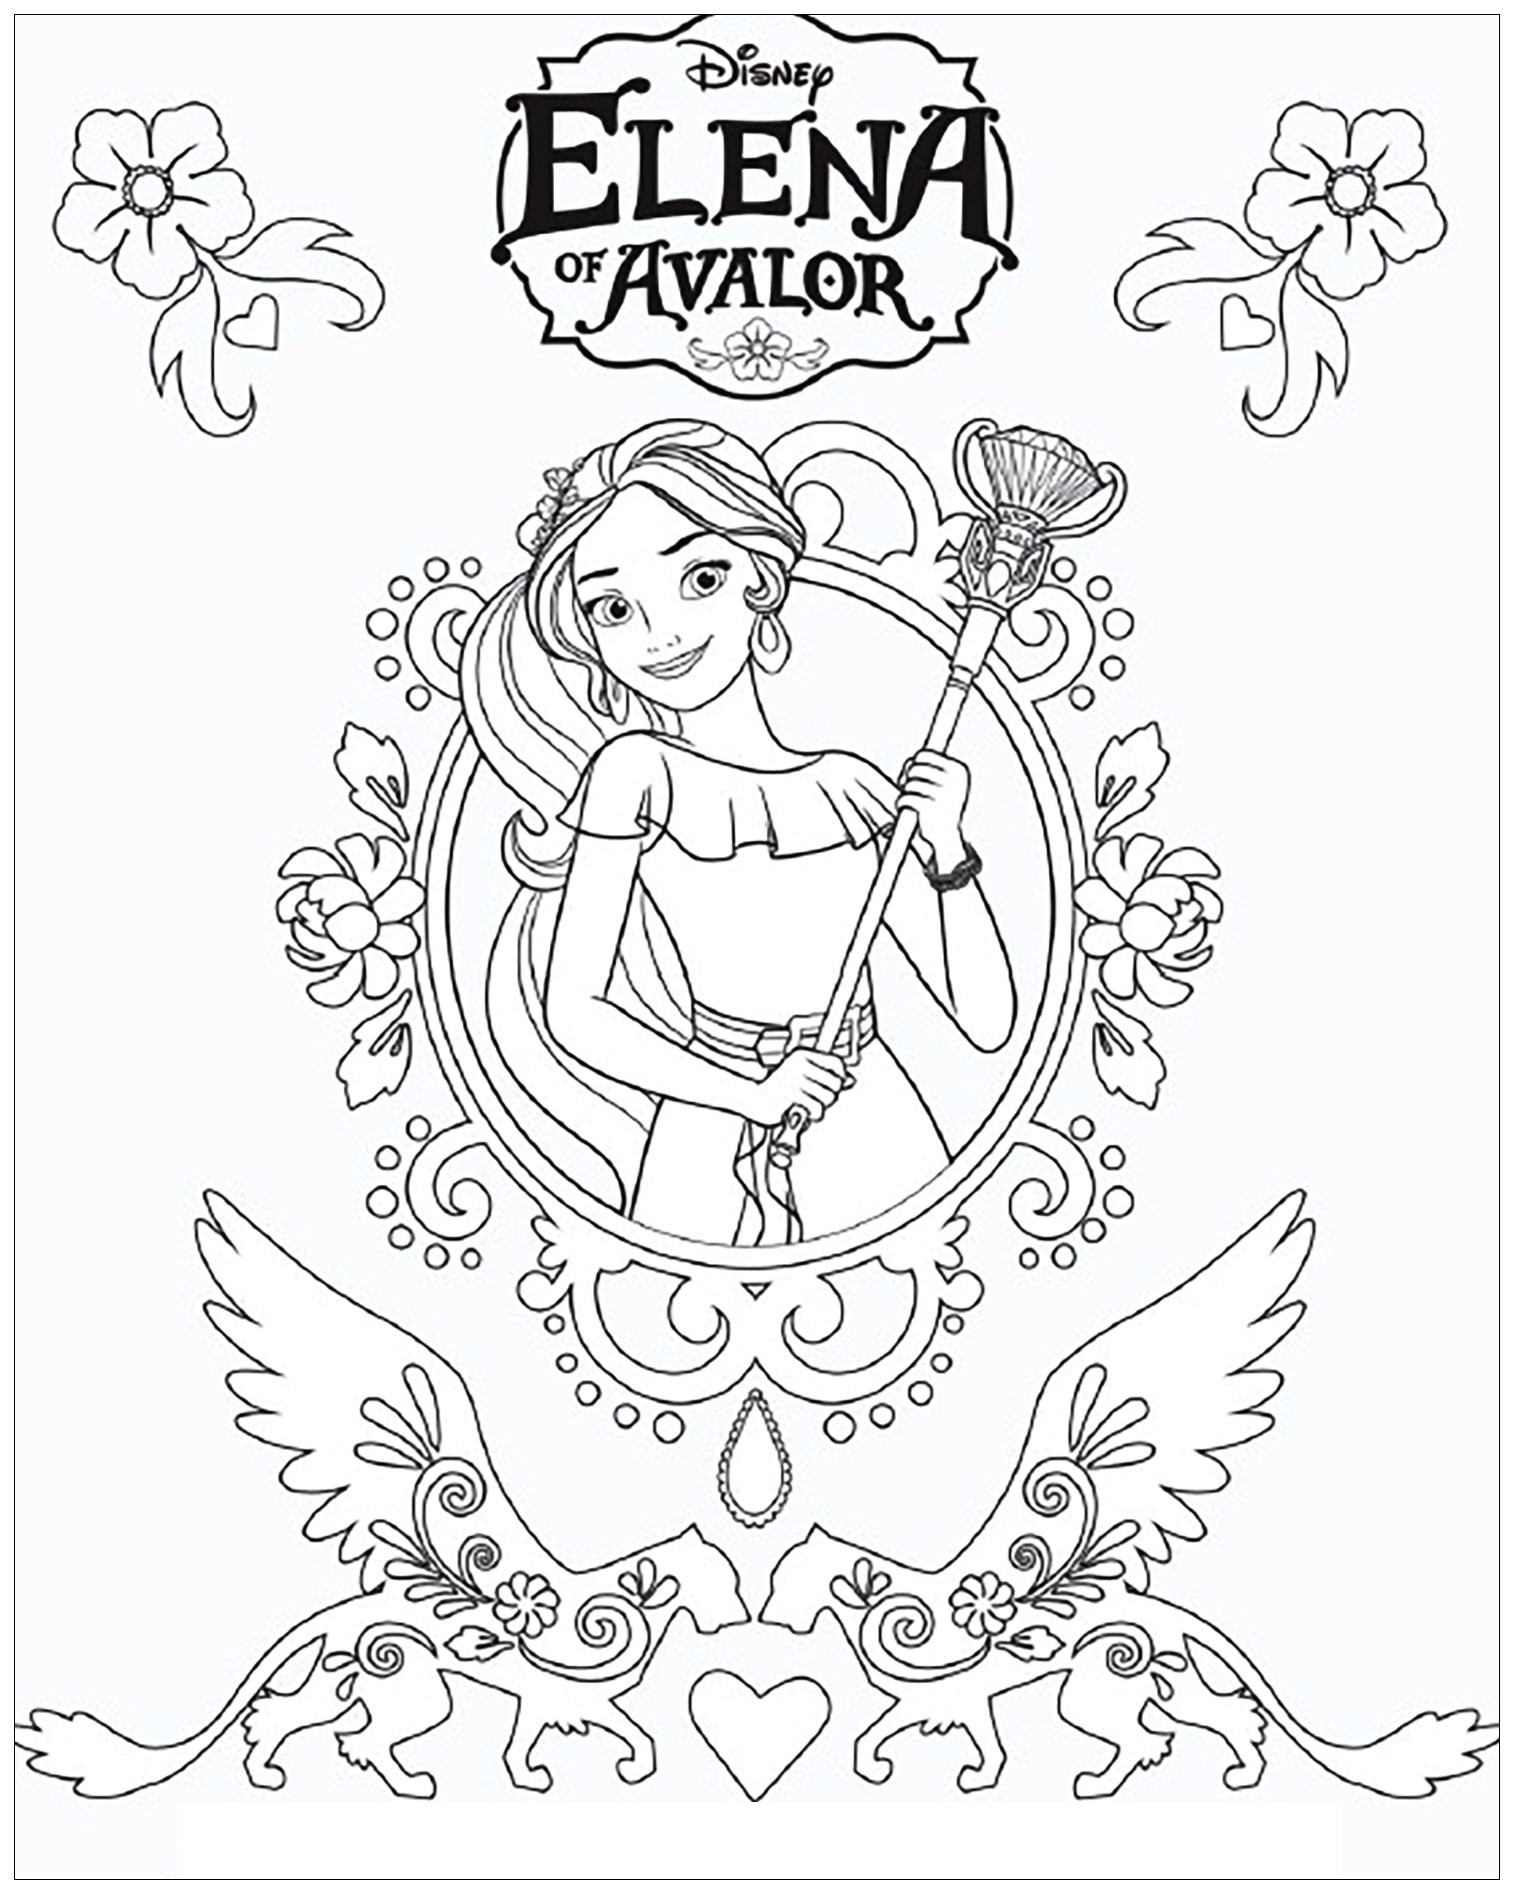 Free Elena Avalor coloring page to